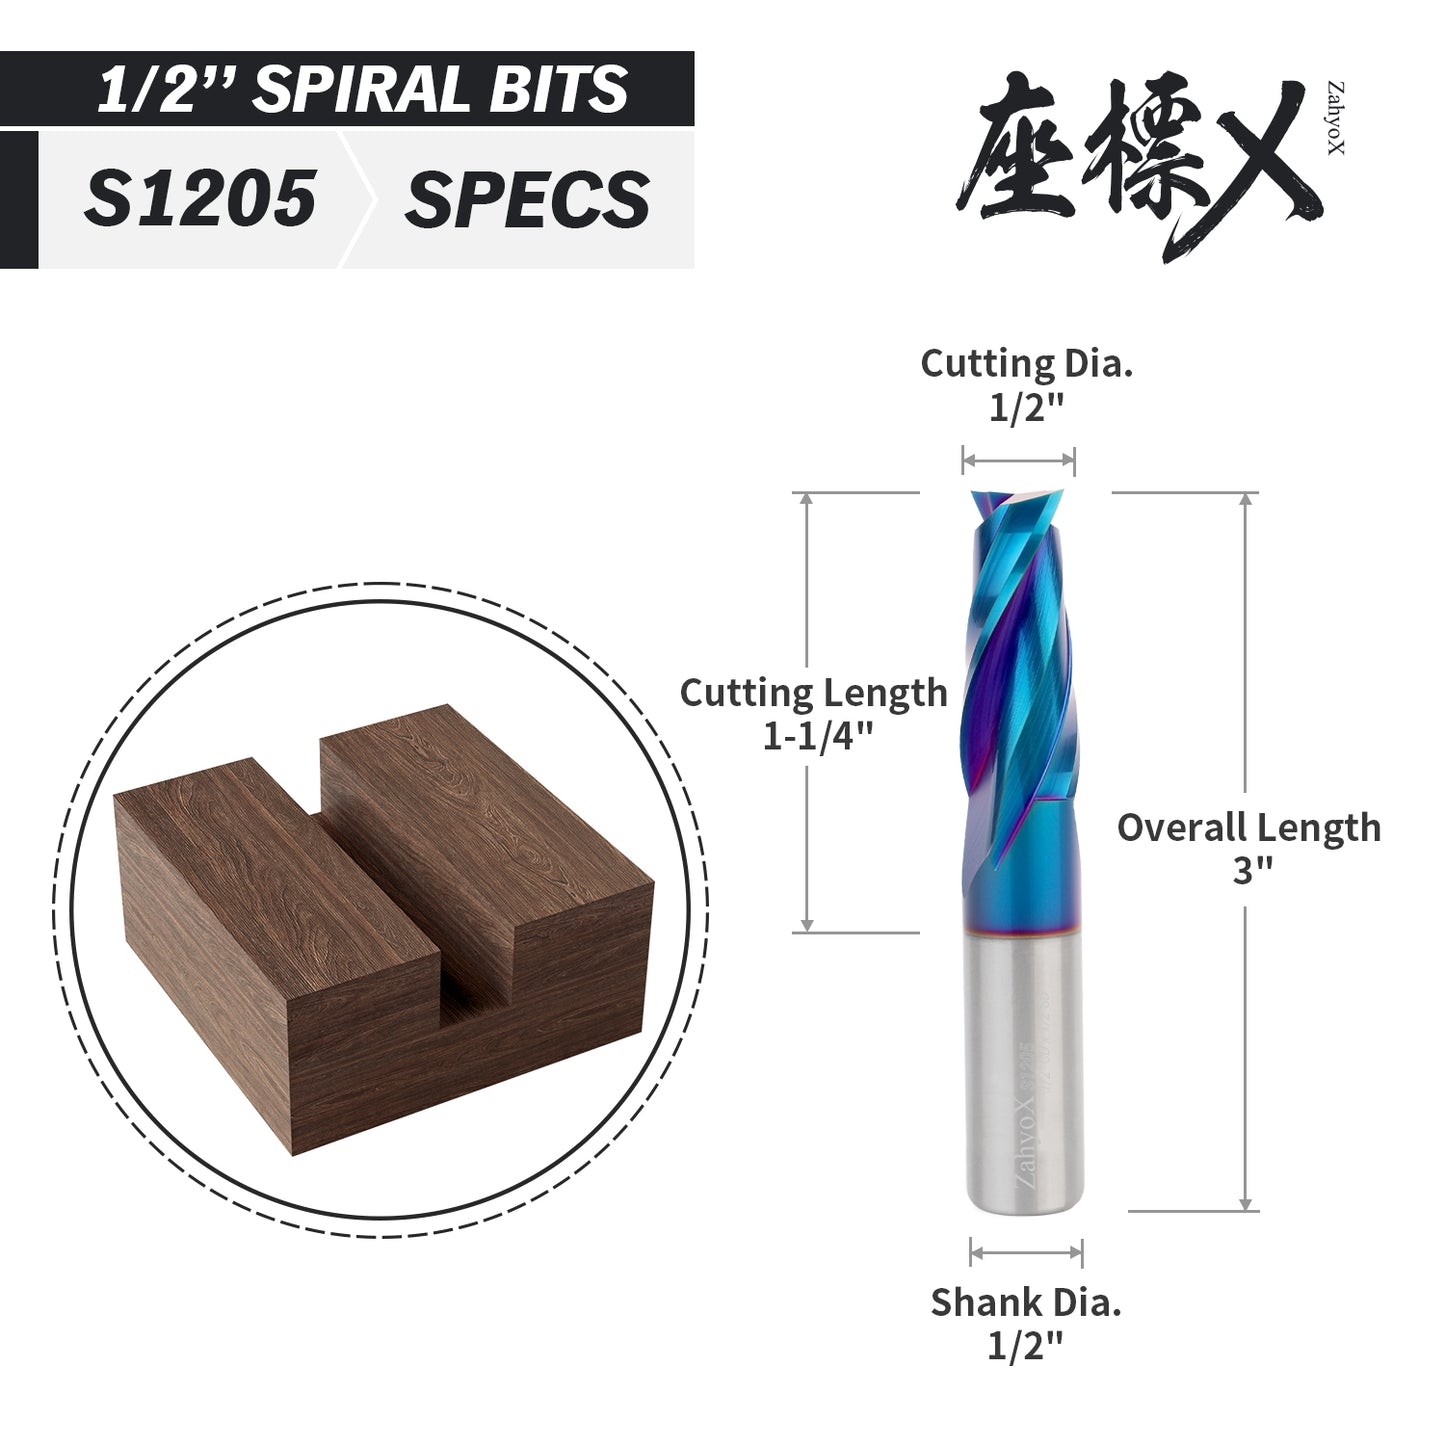 S1205 Upcut Nano Coated CNC Spiral Router Bit - 2Flutes - 1/2 SD - 1/2 CD - 1-1/4 CL - 3 OL